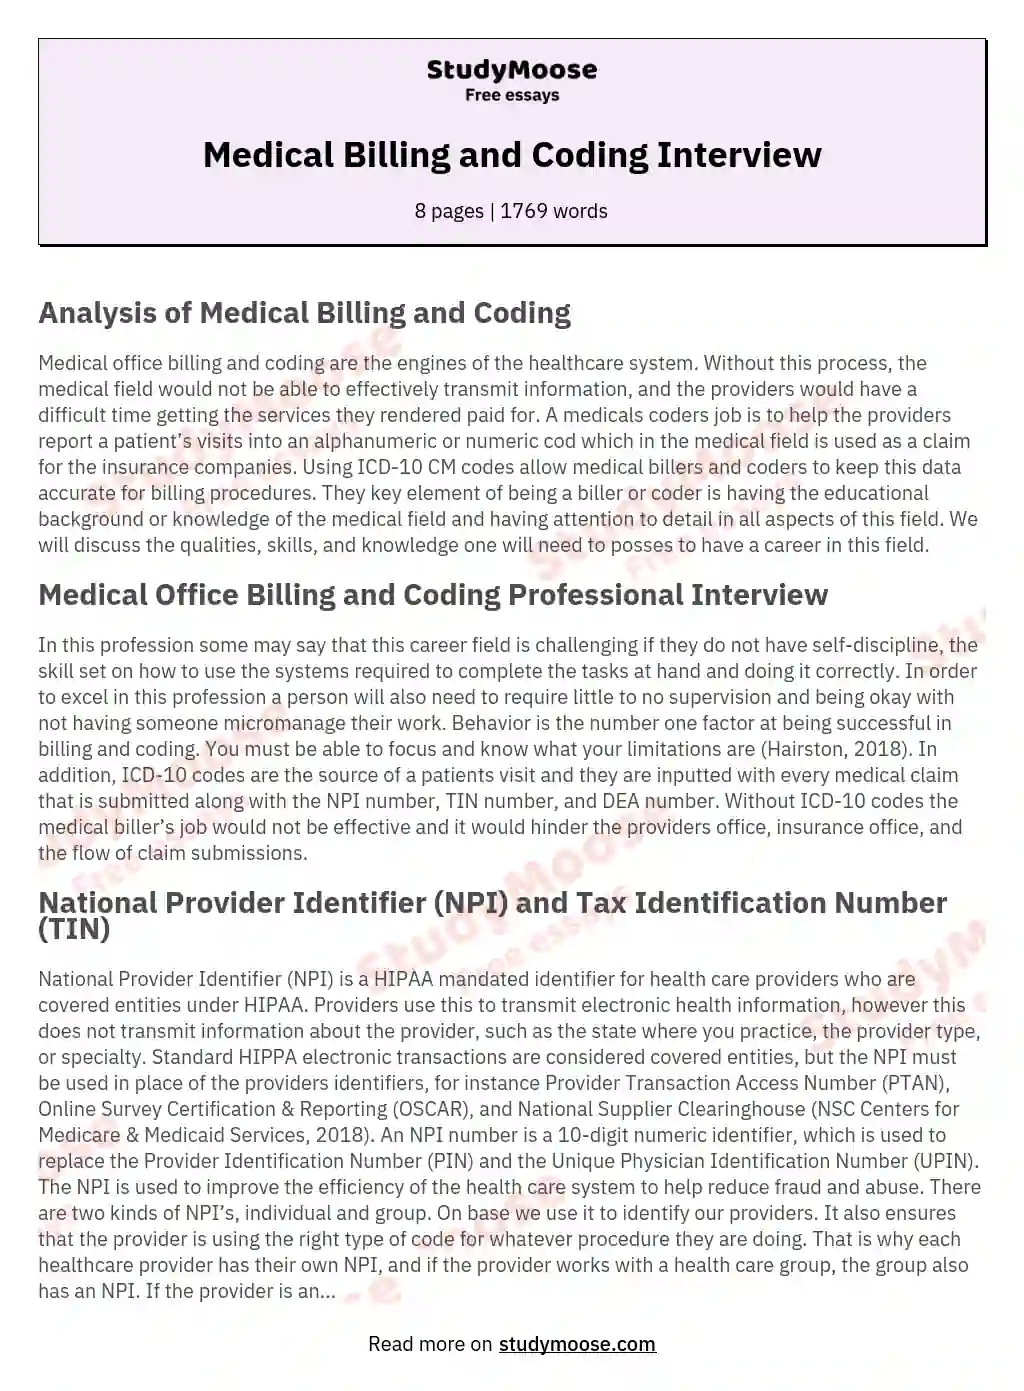 Medical Billing and Coding Interview essay